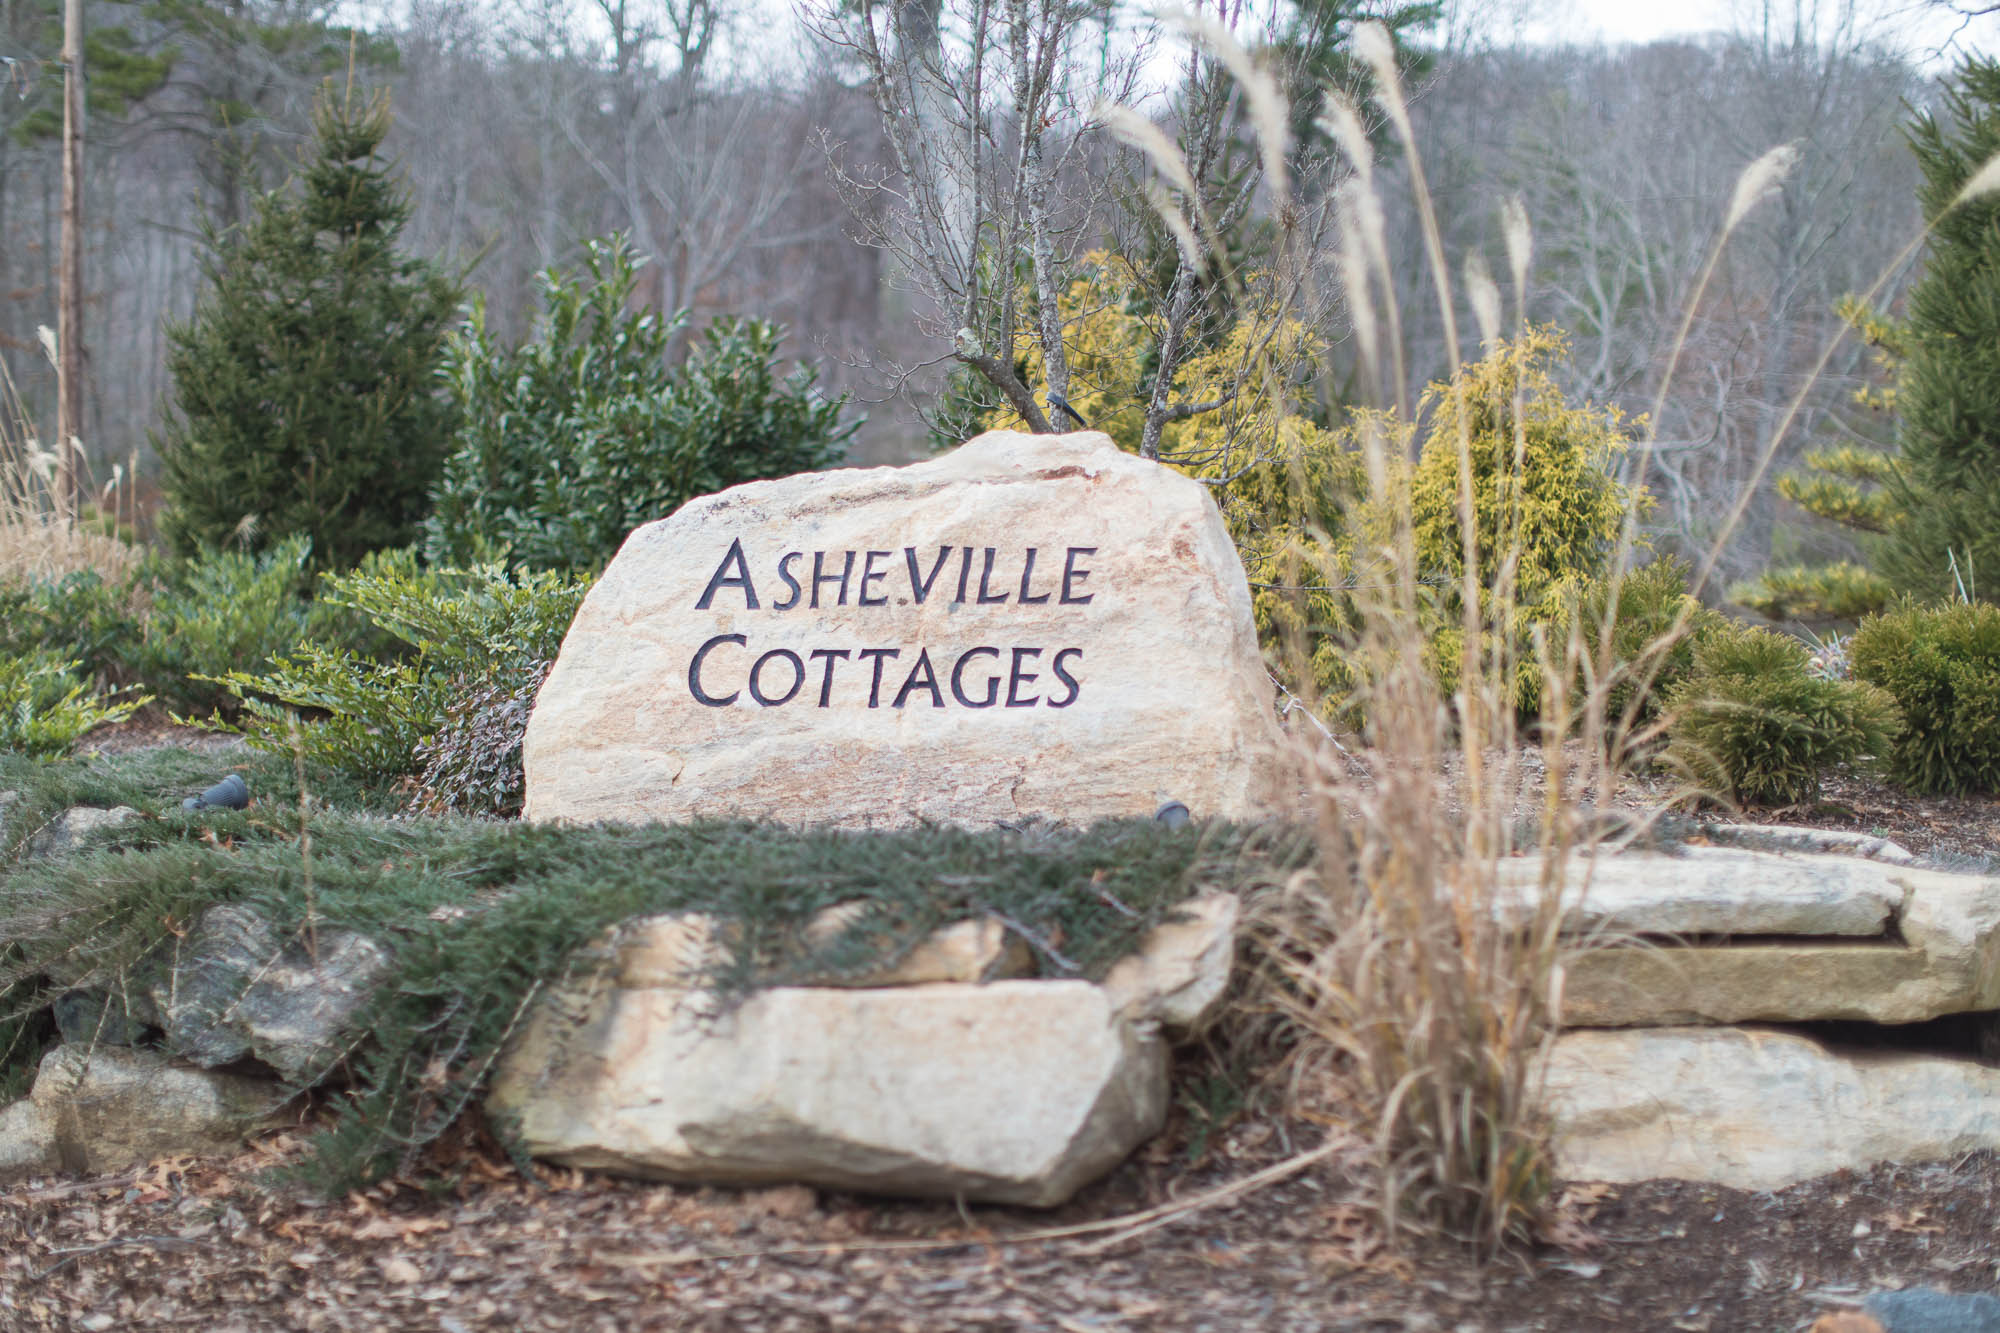 Spend Your Vacation at Asheville Cottages in Asheville, NC